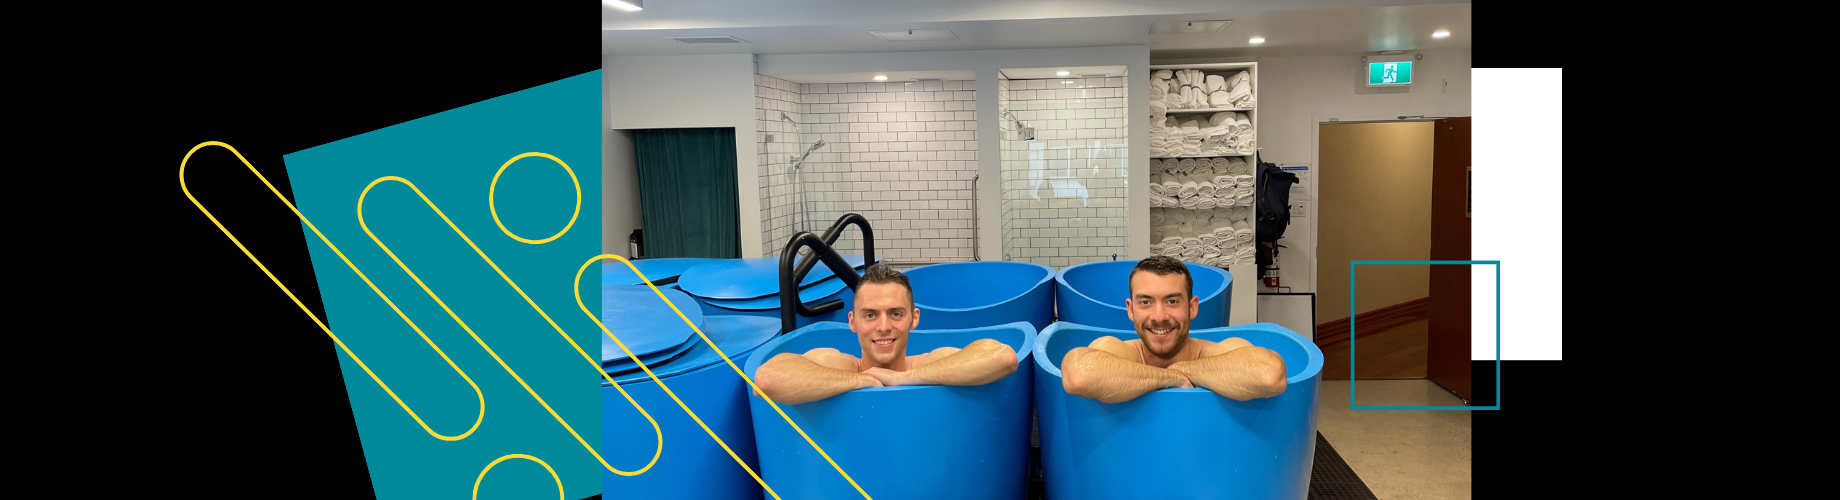 Revitalizing wellness experience at Cove Sports Recovery in Vancouver with a focus on cold plunge therapy, wellness stretching sessions, and a serene atmosphere promoting better sleep and preventative healthcare.